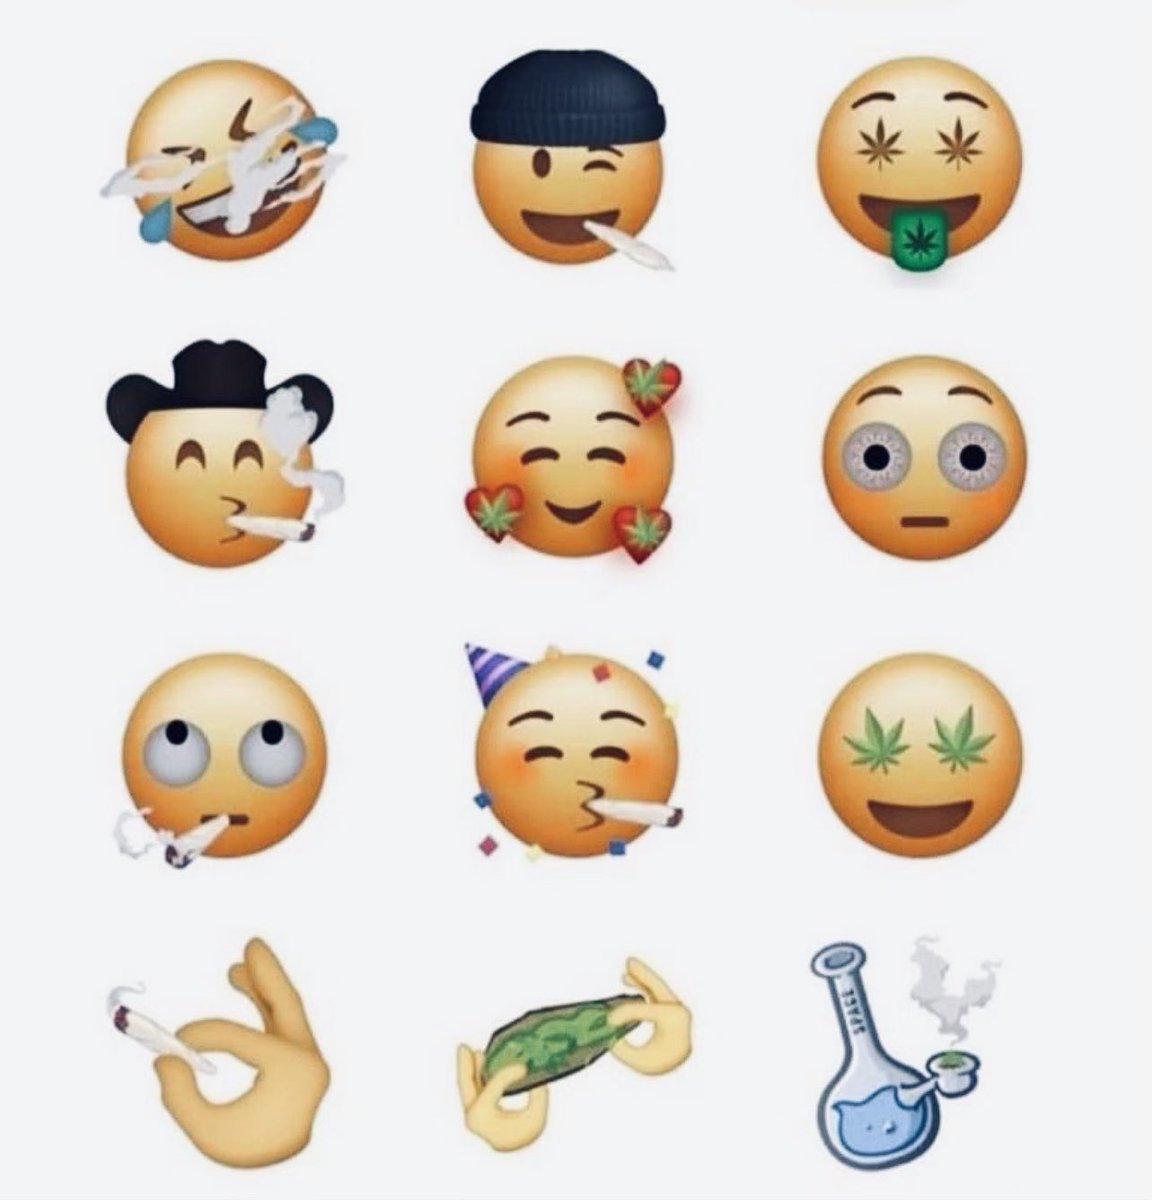 Ok @elonmusk , you love being the 1st, so now that the Feds have accepted the fact that #Cannabis is medicine, be a leader and give us Cannabis emojis on @x !! #LegalizeIt #CannabisCommunity #Mmemberville